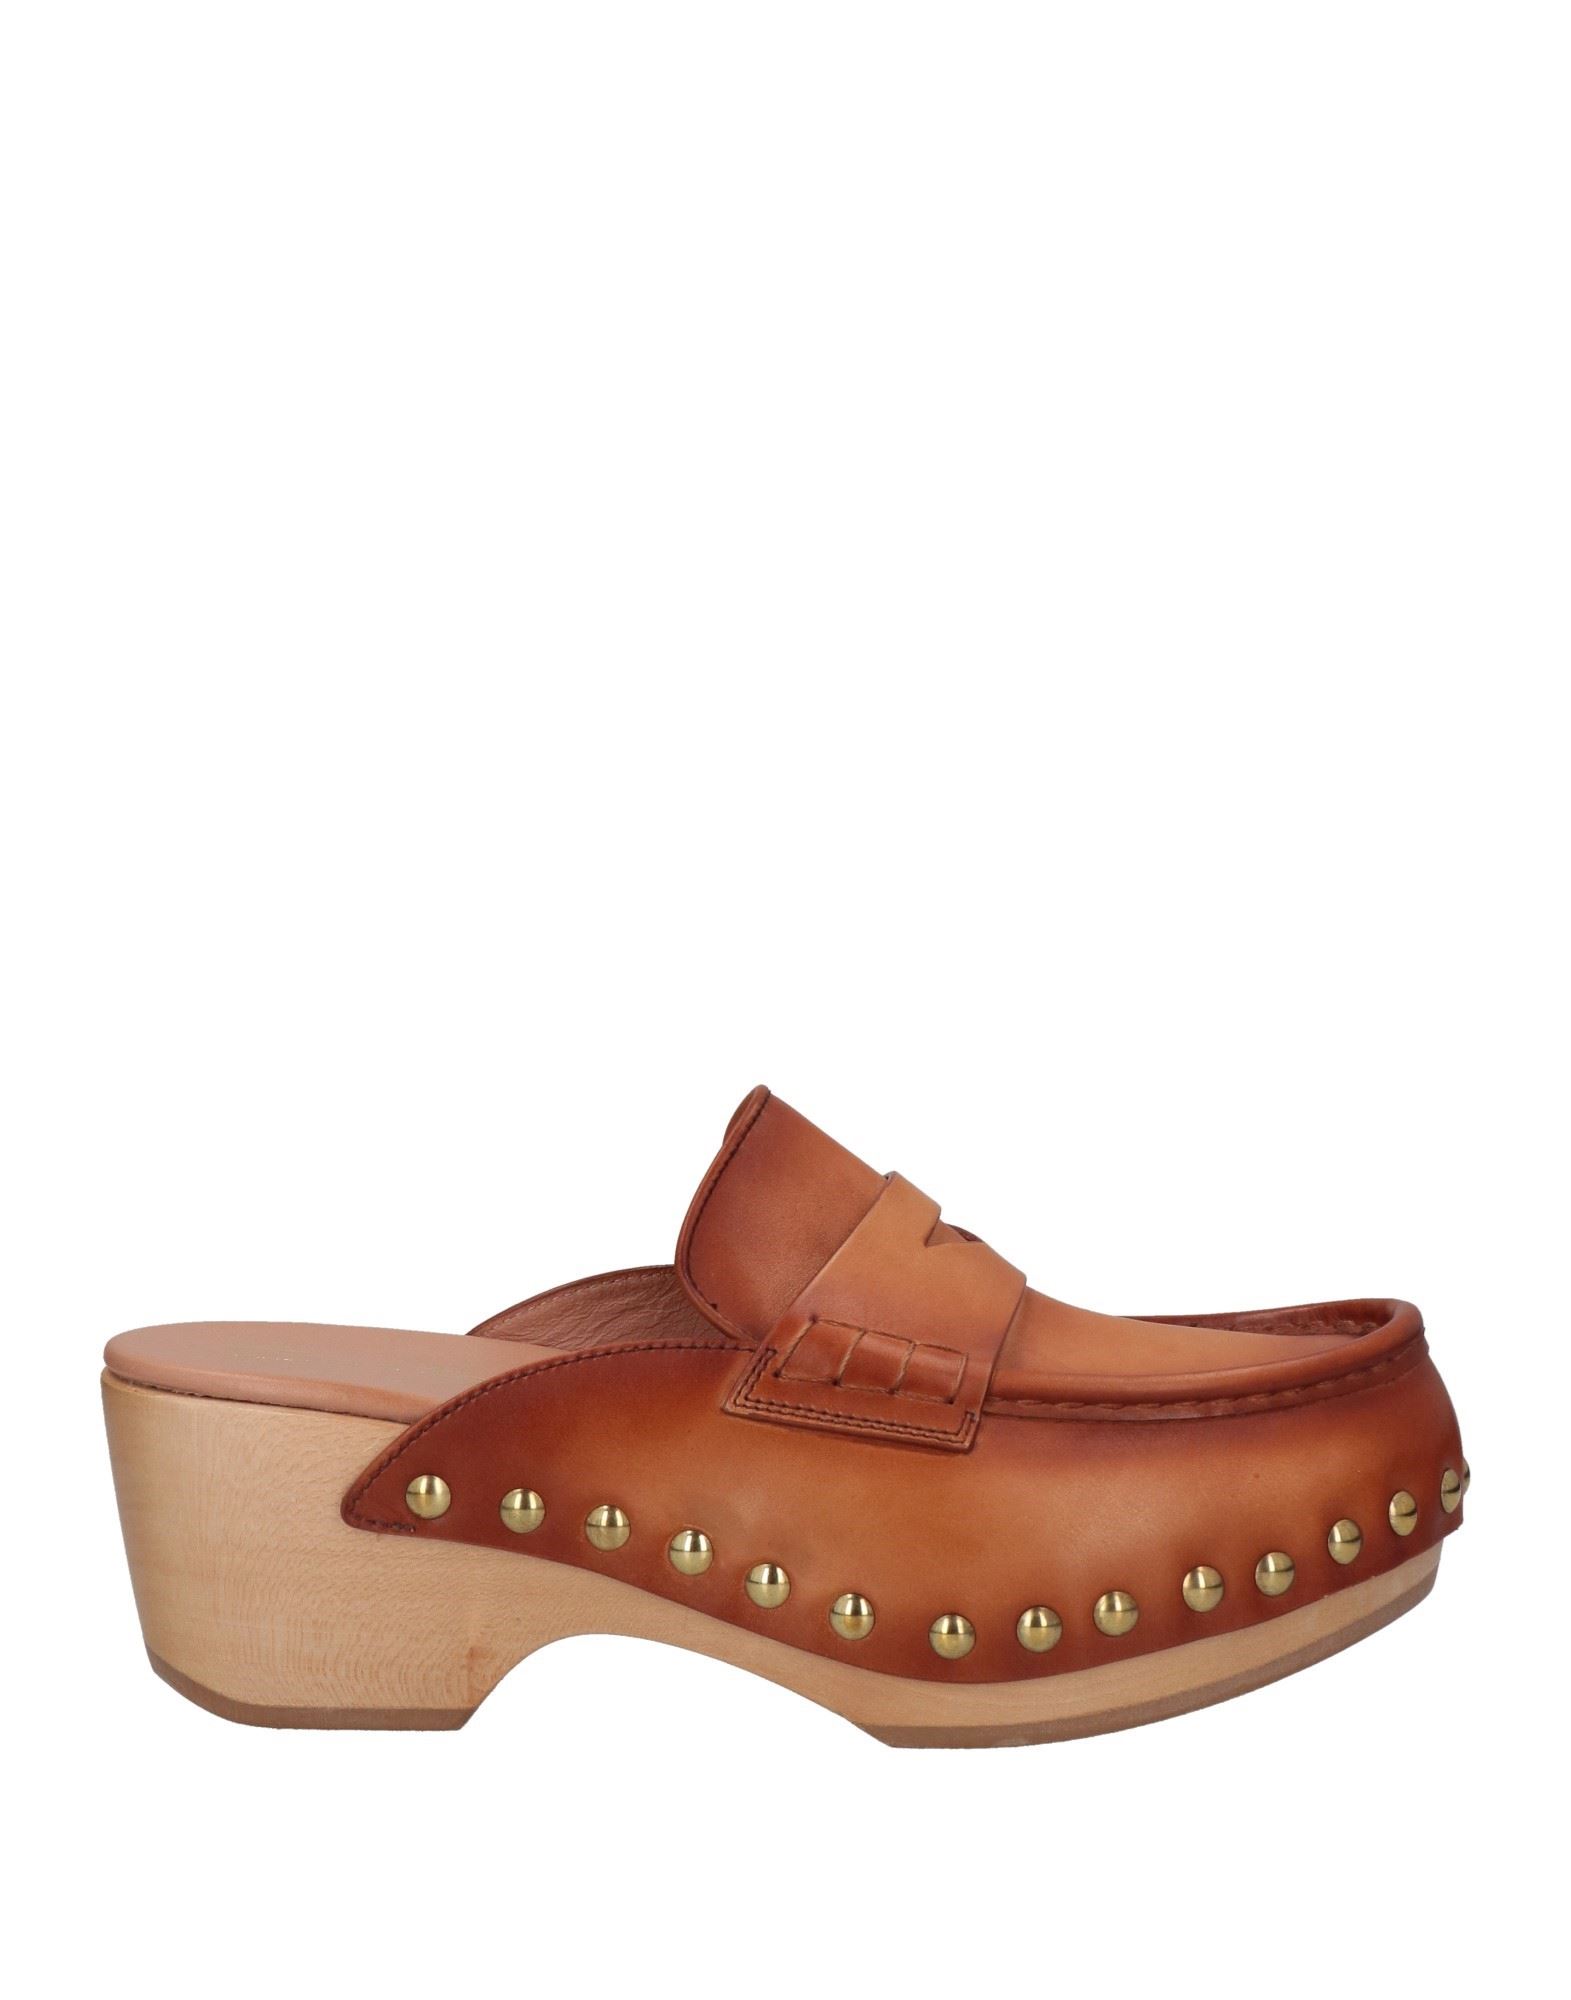 Santoni Woman Mules & Clogs Tan Size 8 Soft Leather In Brown